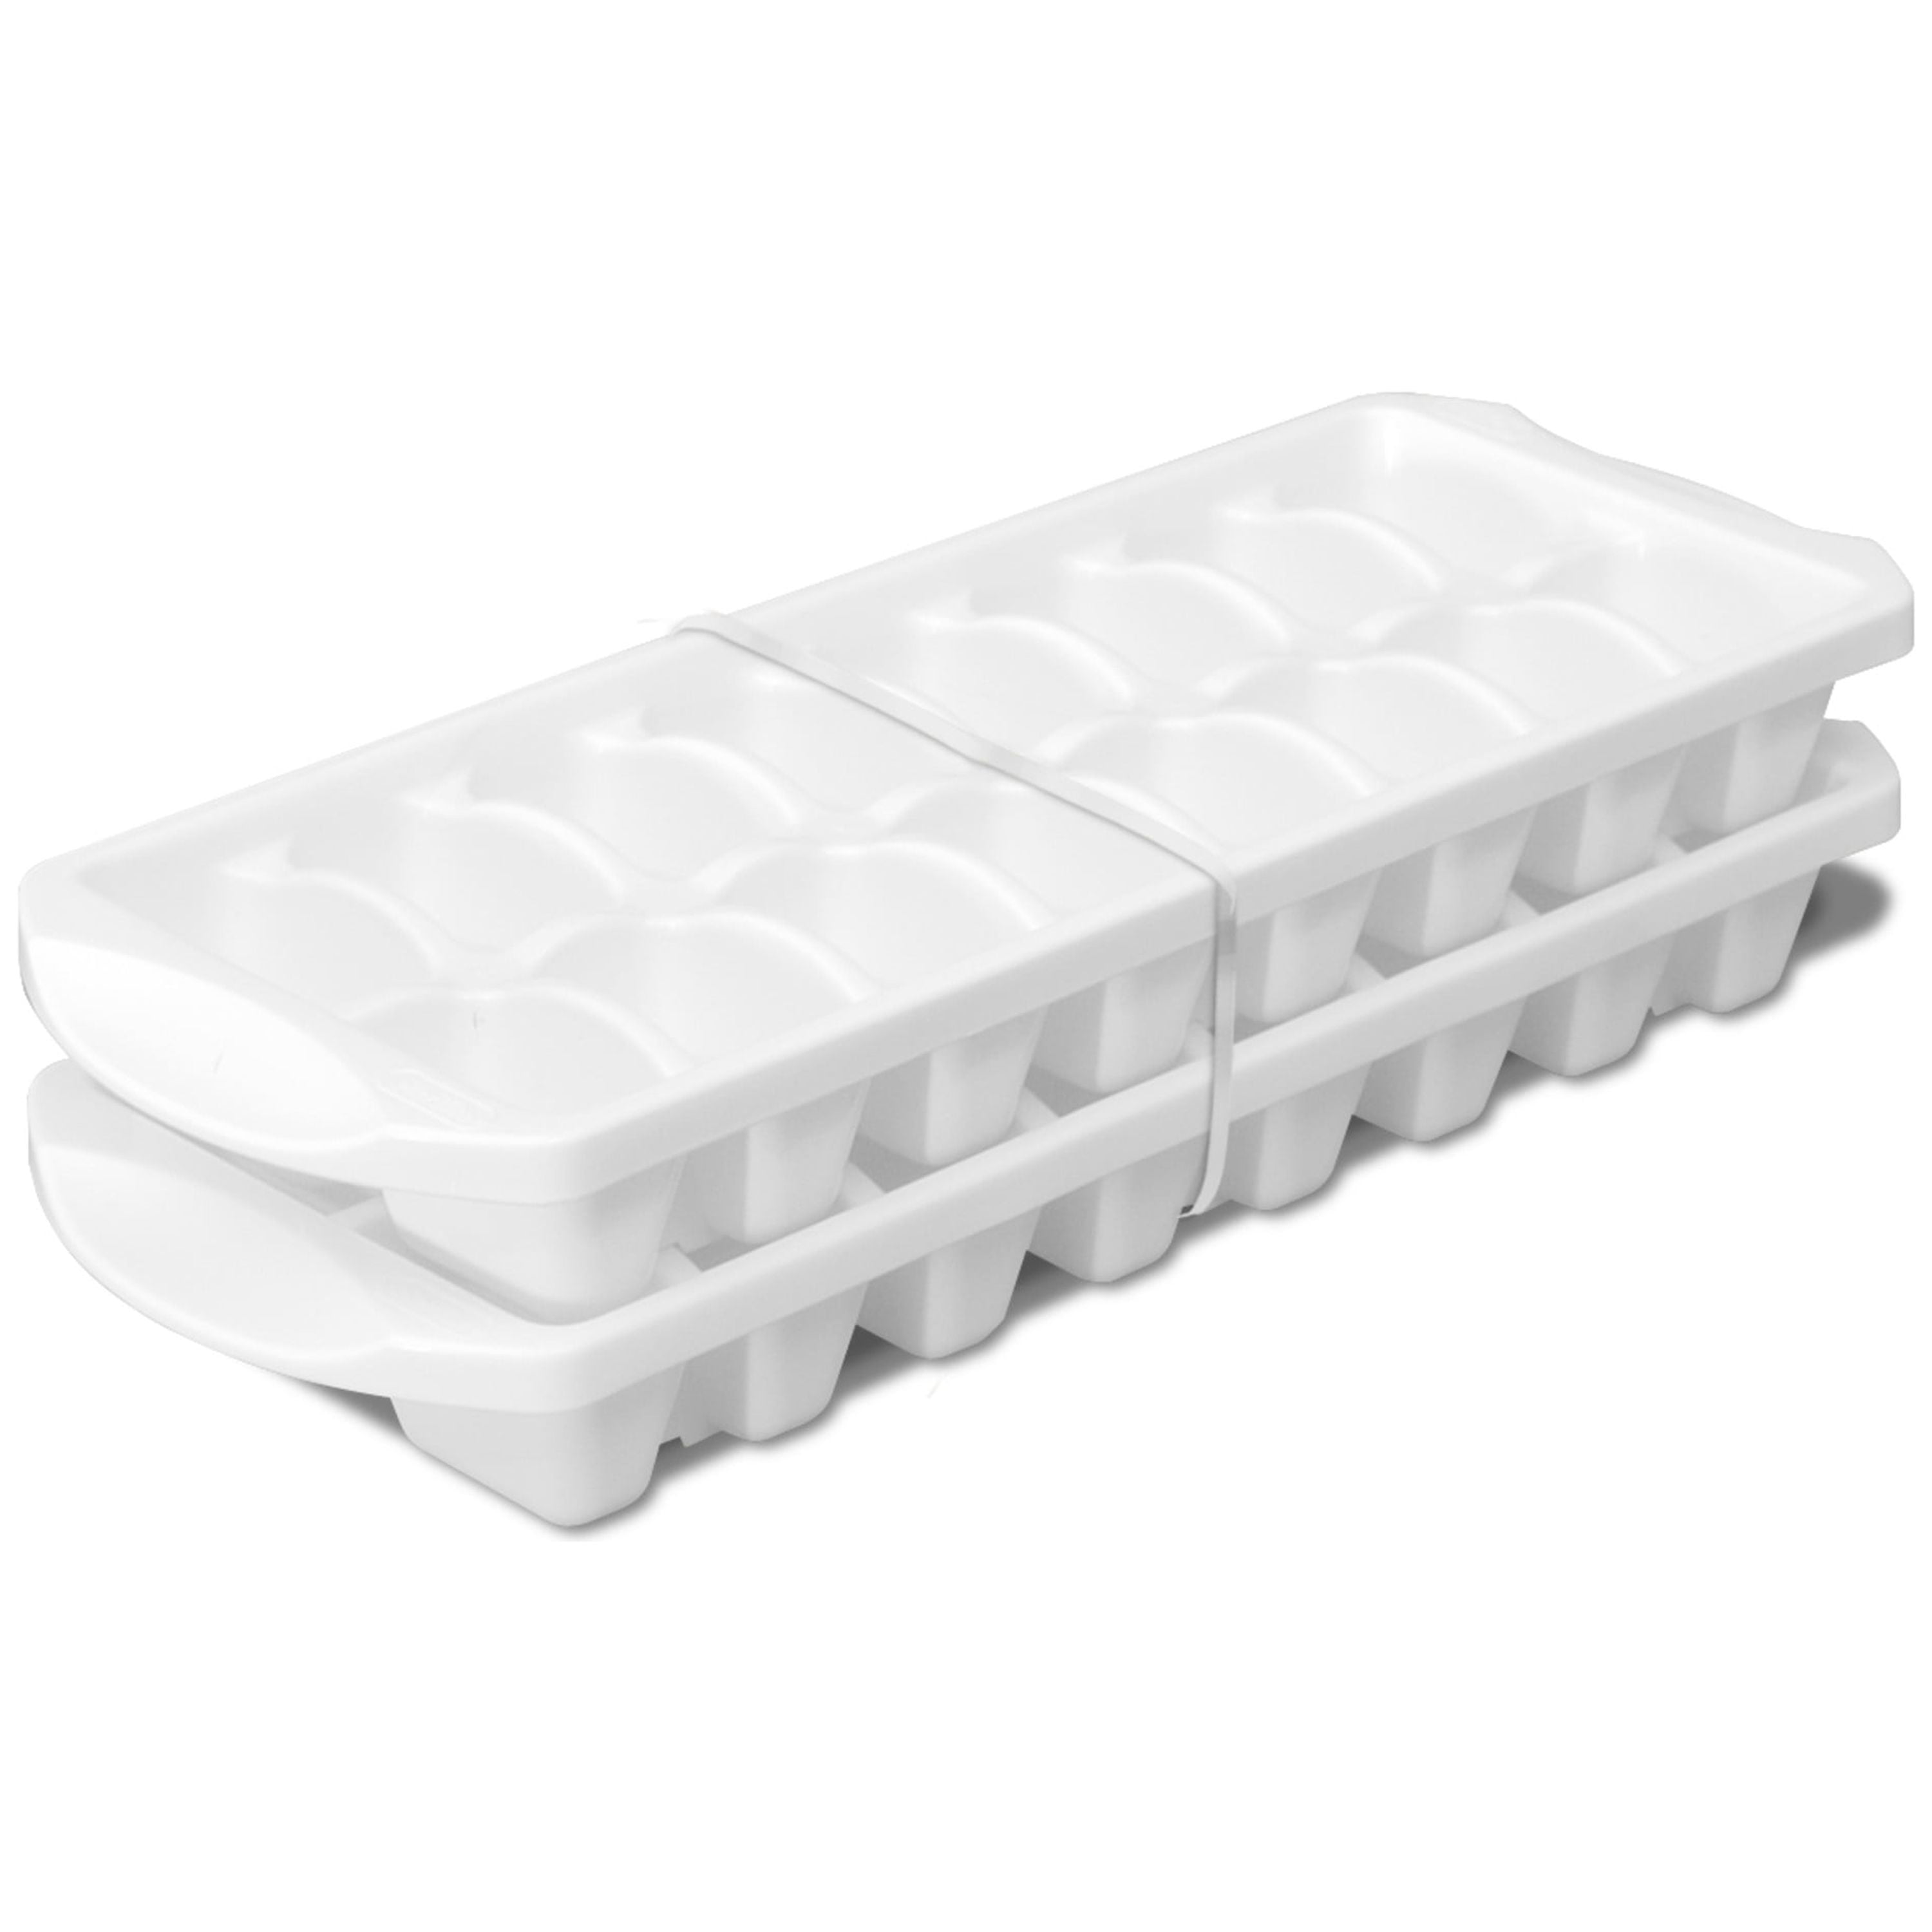 Kitch Easy Release White Ice Cube Tray, 16 Cube Trays (Pack of 2) 